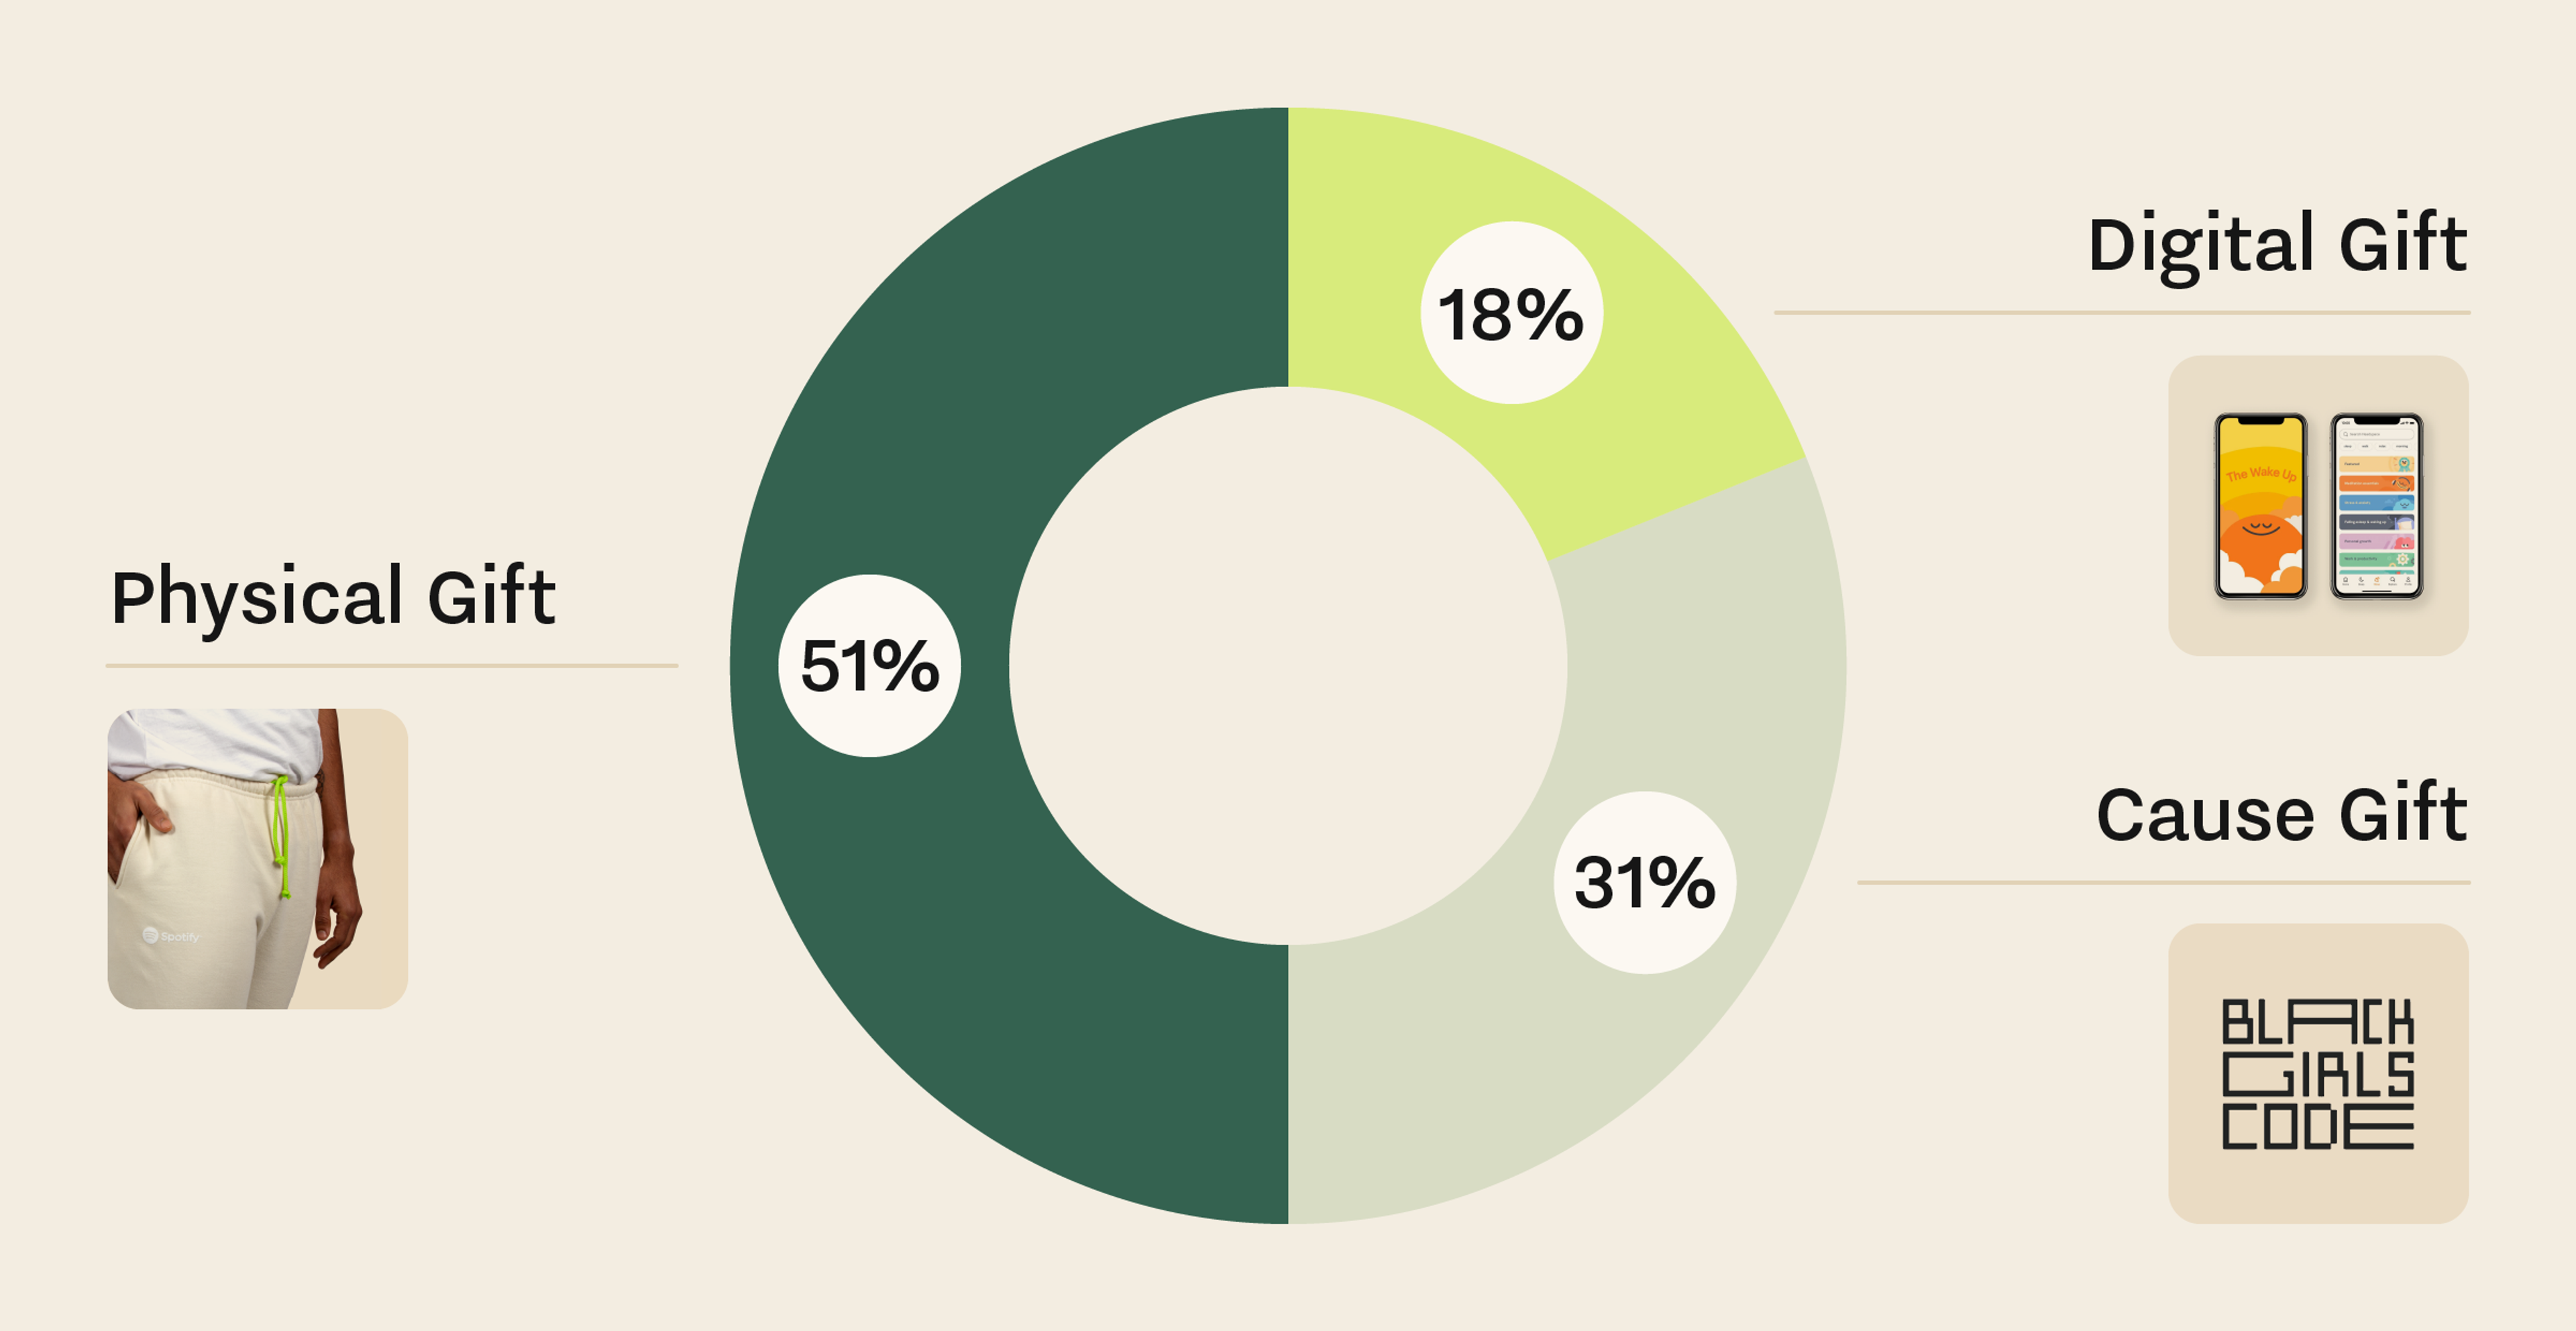 A pie chart showing the breakdown of choices made for a gift, 52% physcial gift, 18% digital gift, 31% cause gift.